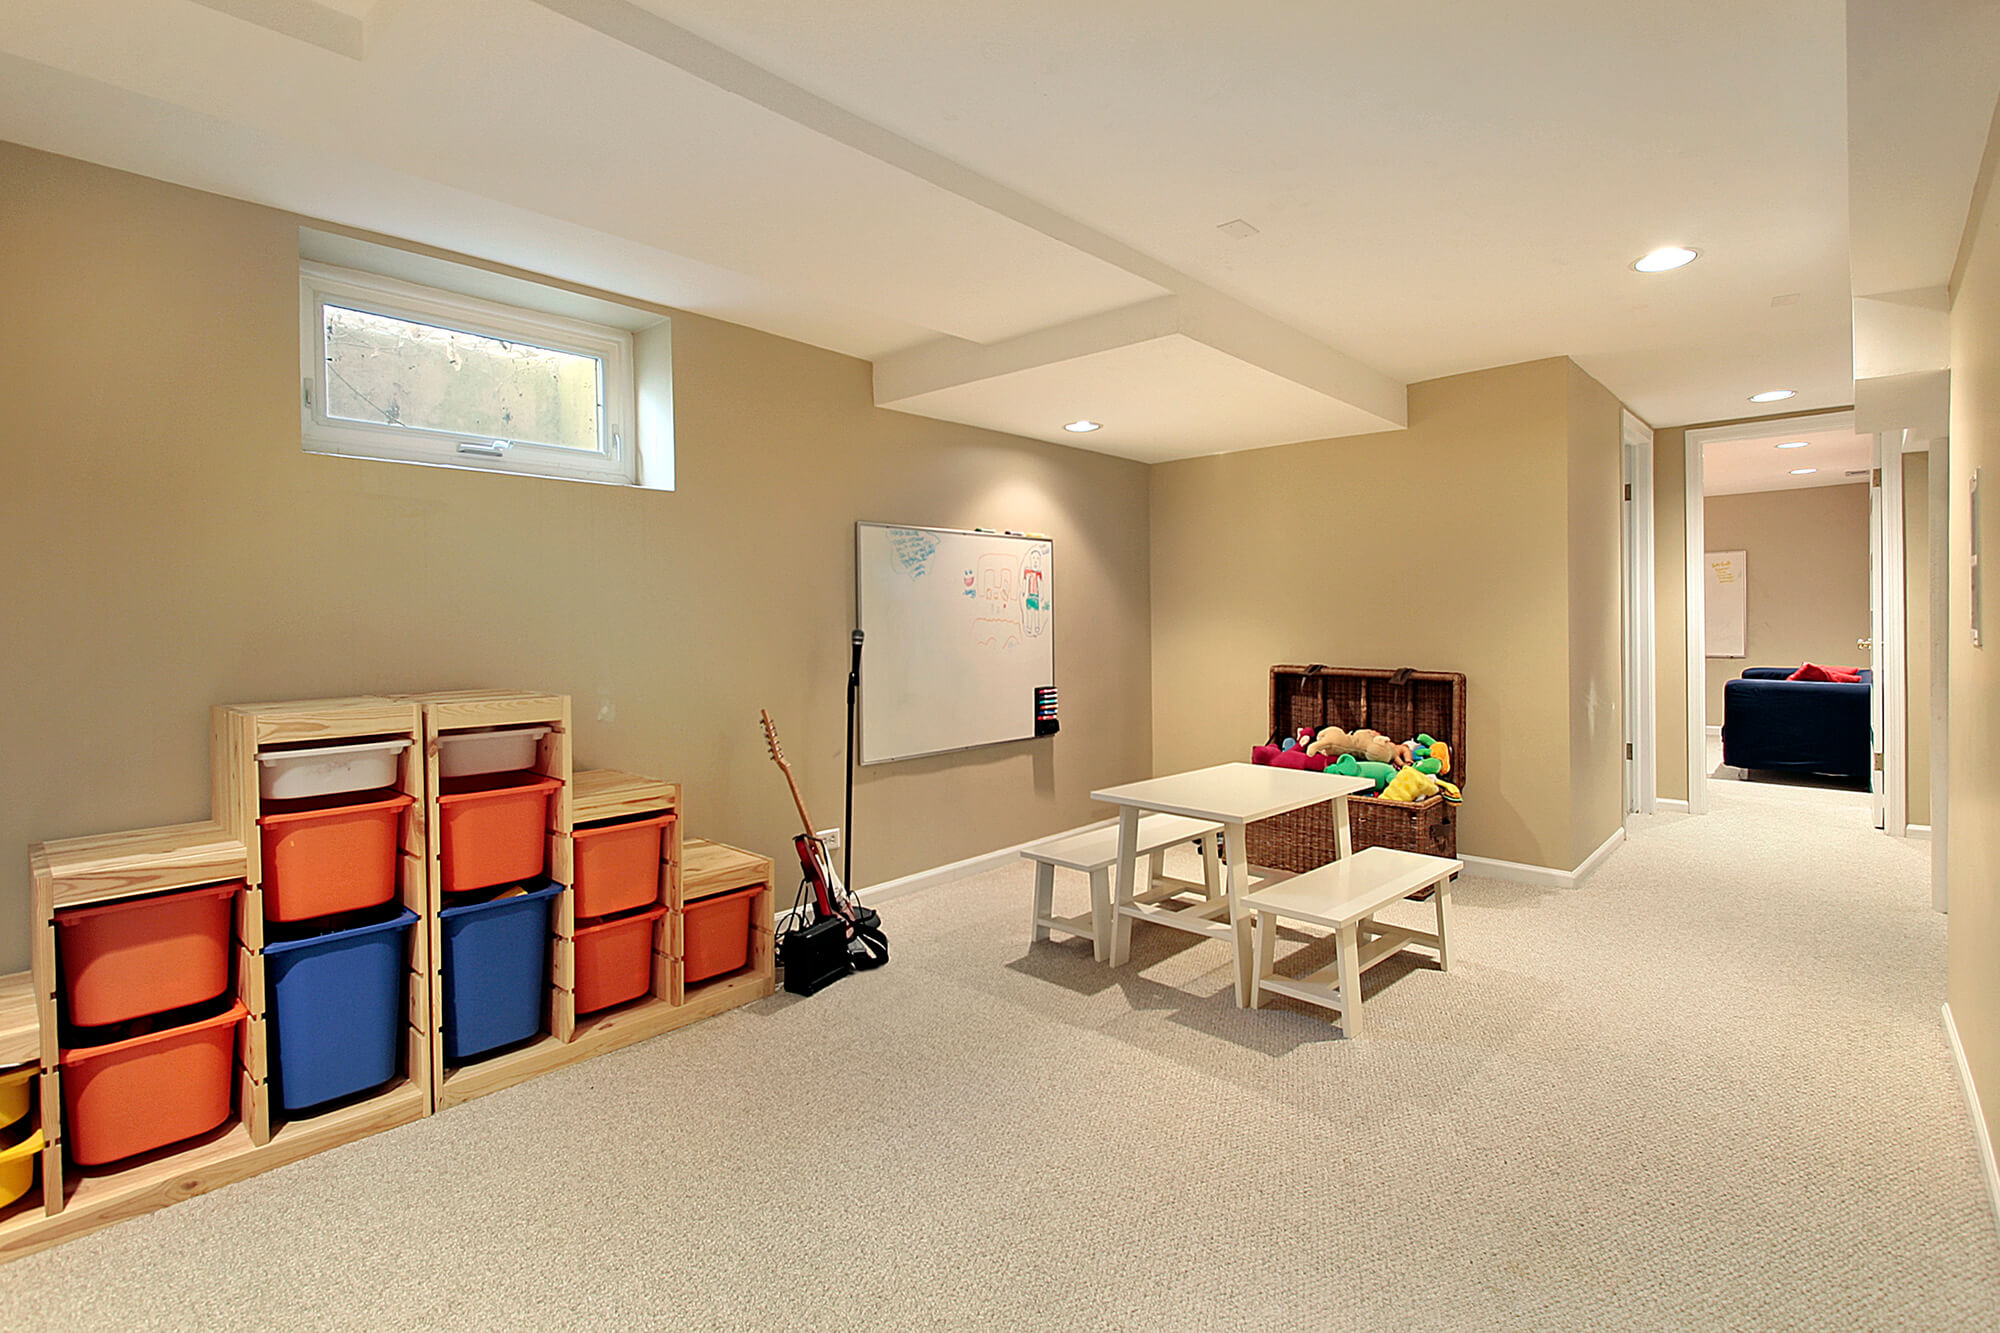 Unfinished Basement Ideas for Storage - Old House Journal